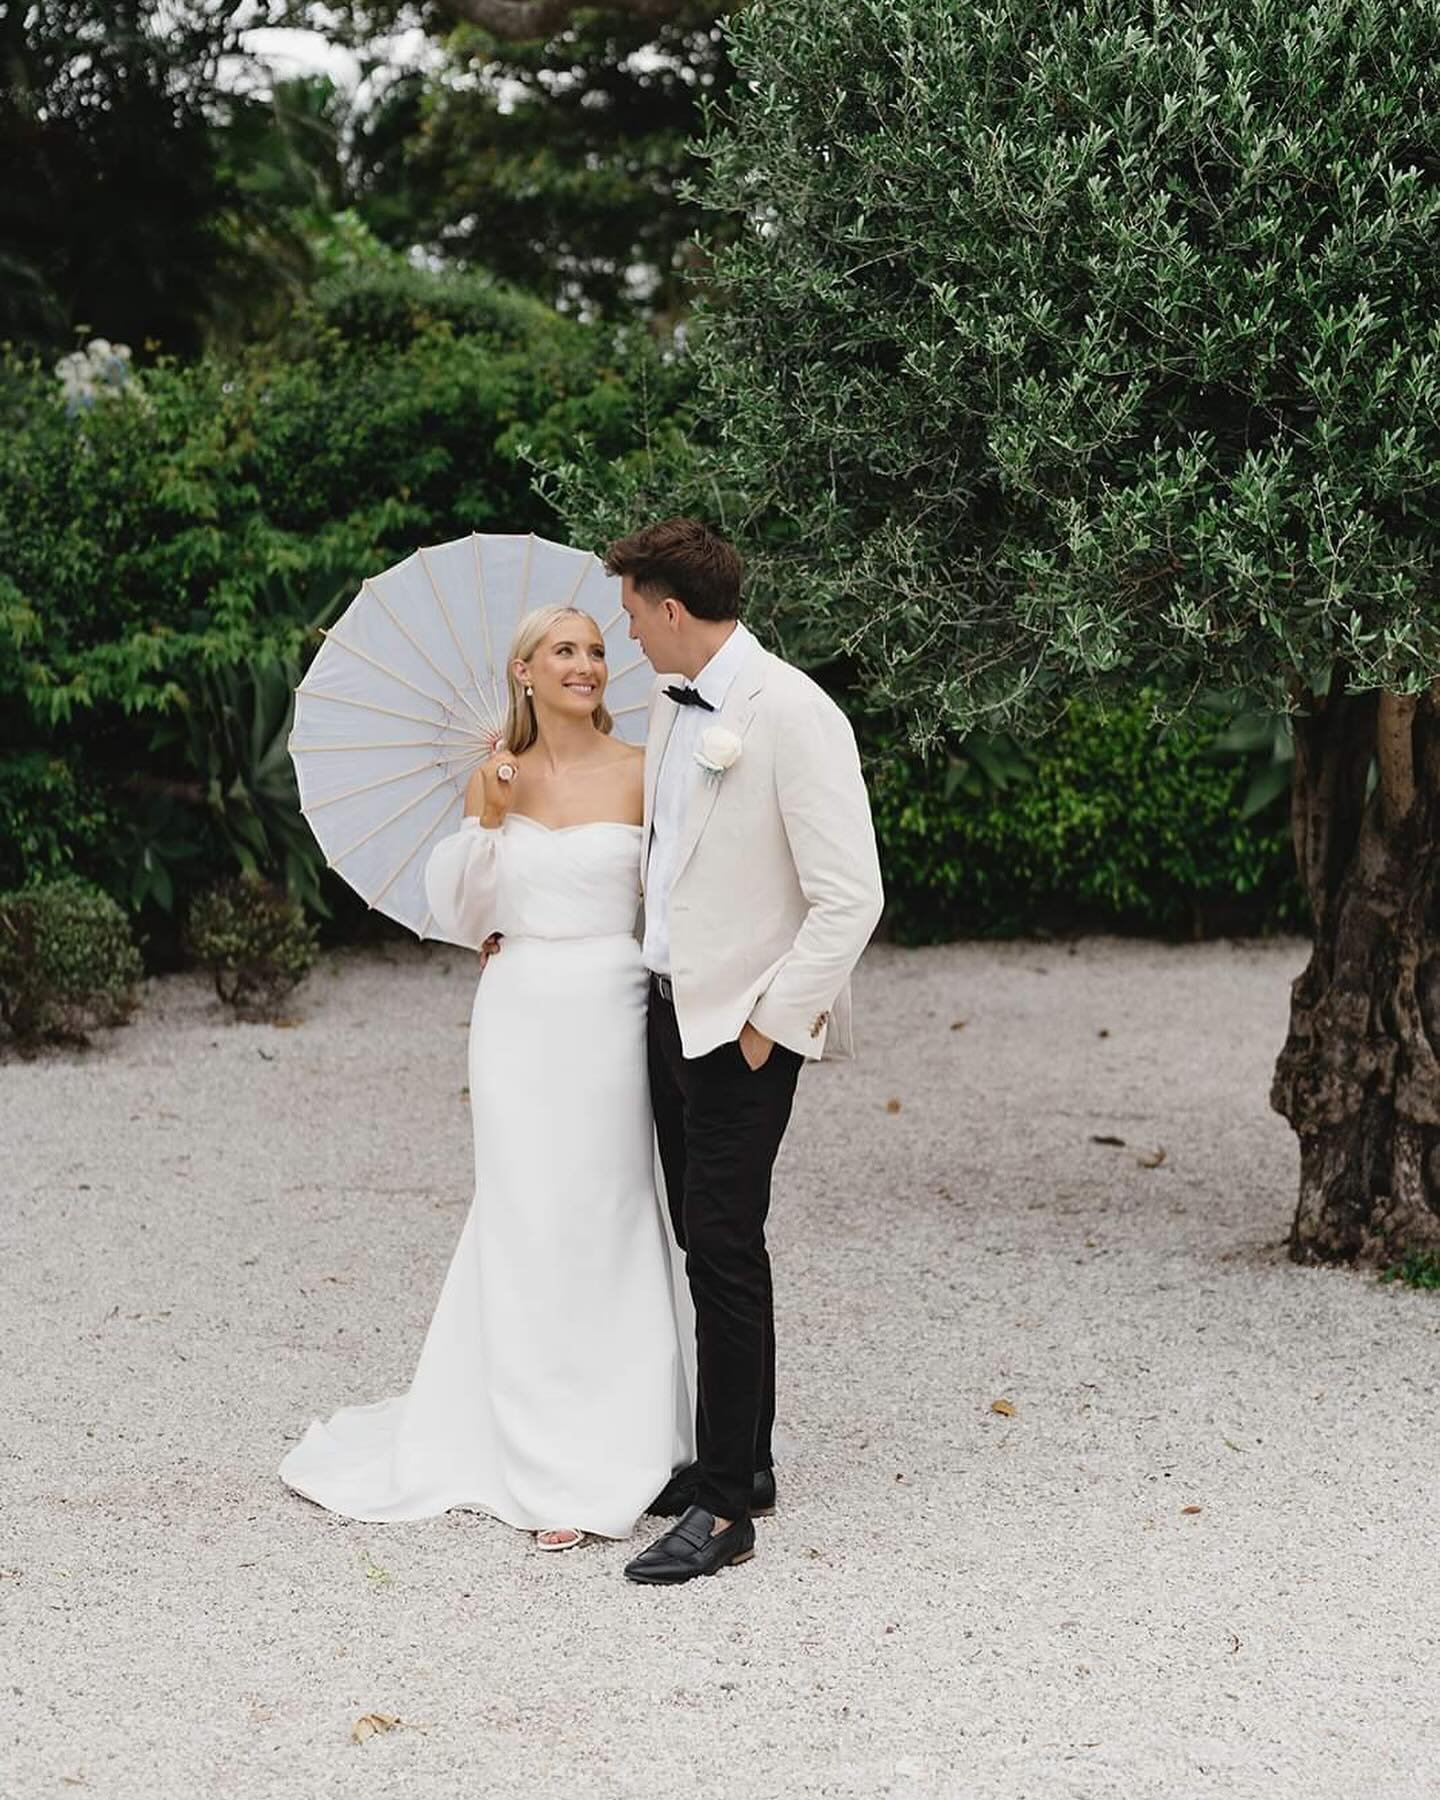 Sneak peeks from Alicia &amp; Connor&rsquo;s special day 🩵🥂

Venue @figtreerestaurant 
Planning &amp; Coordination @byronbayweddings 
Style &amp; Furniture Hire @theweddingshed 
Florist @victoriafitzgibbon 
Celebrant @byronbaymarriagecelebrant 
Mus